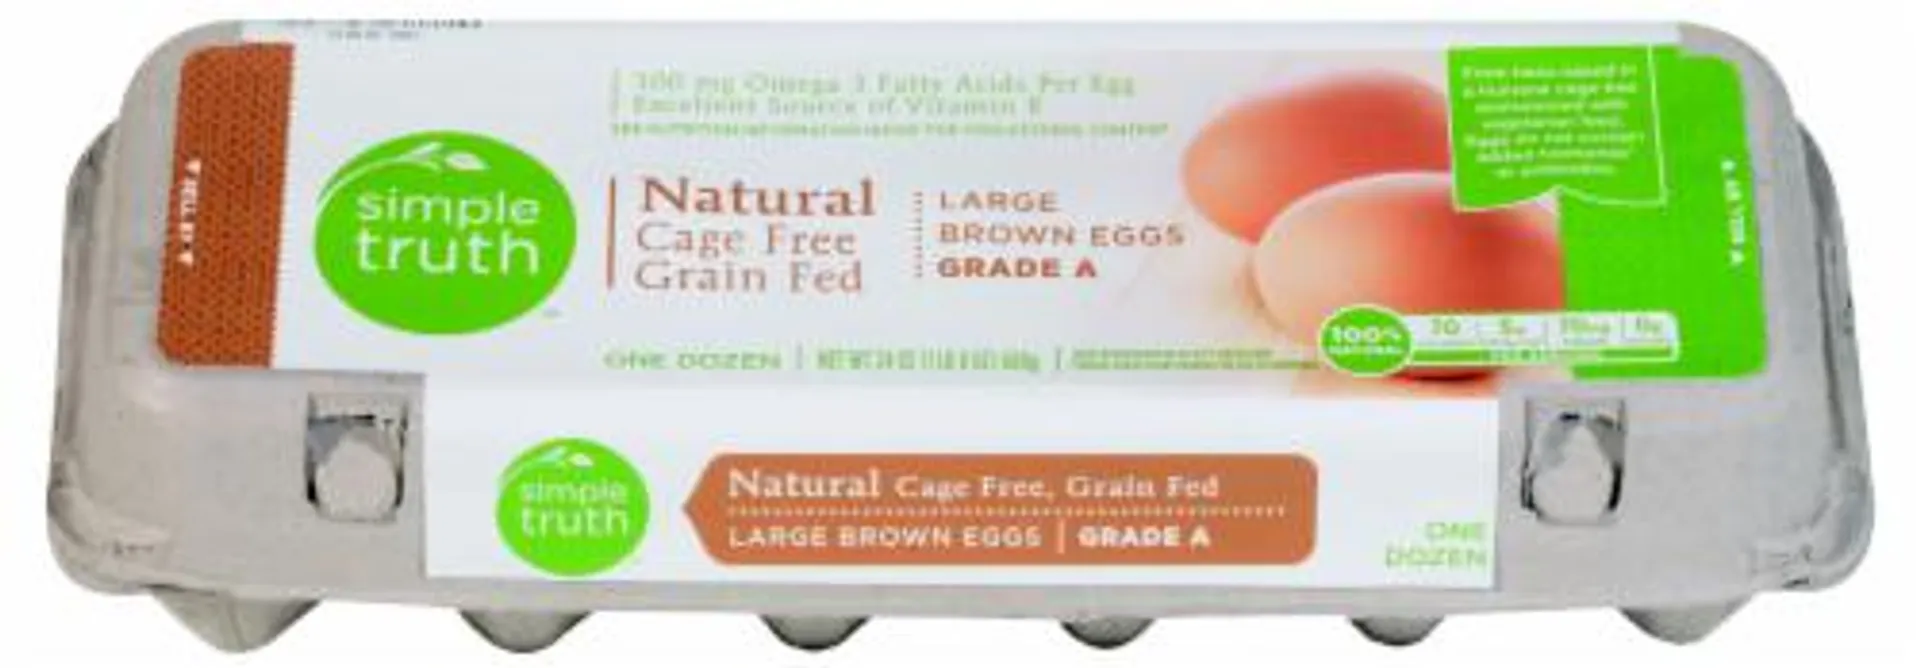 Simple Truth™ Natural Cage Free Large Brown Eggs